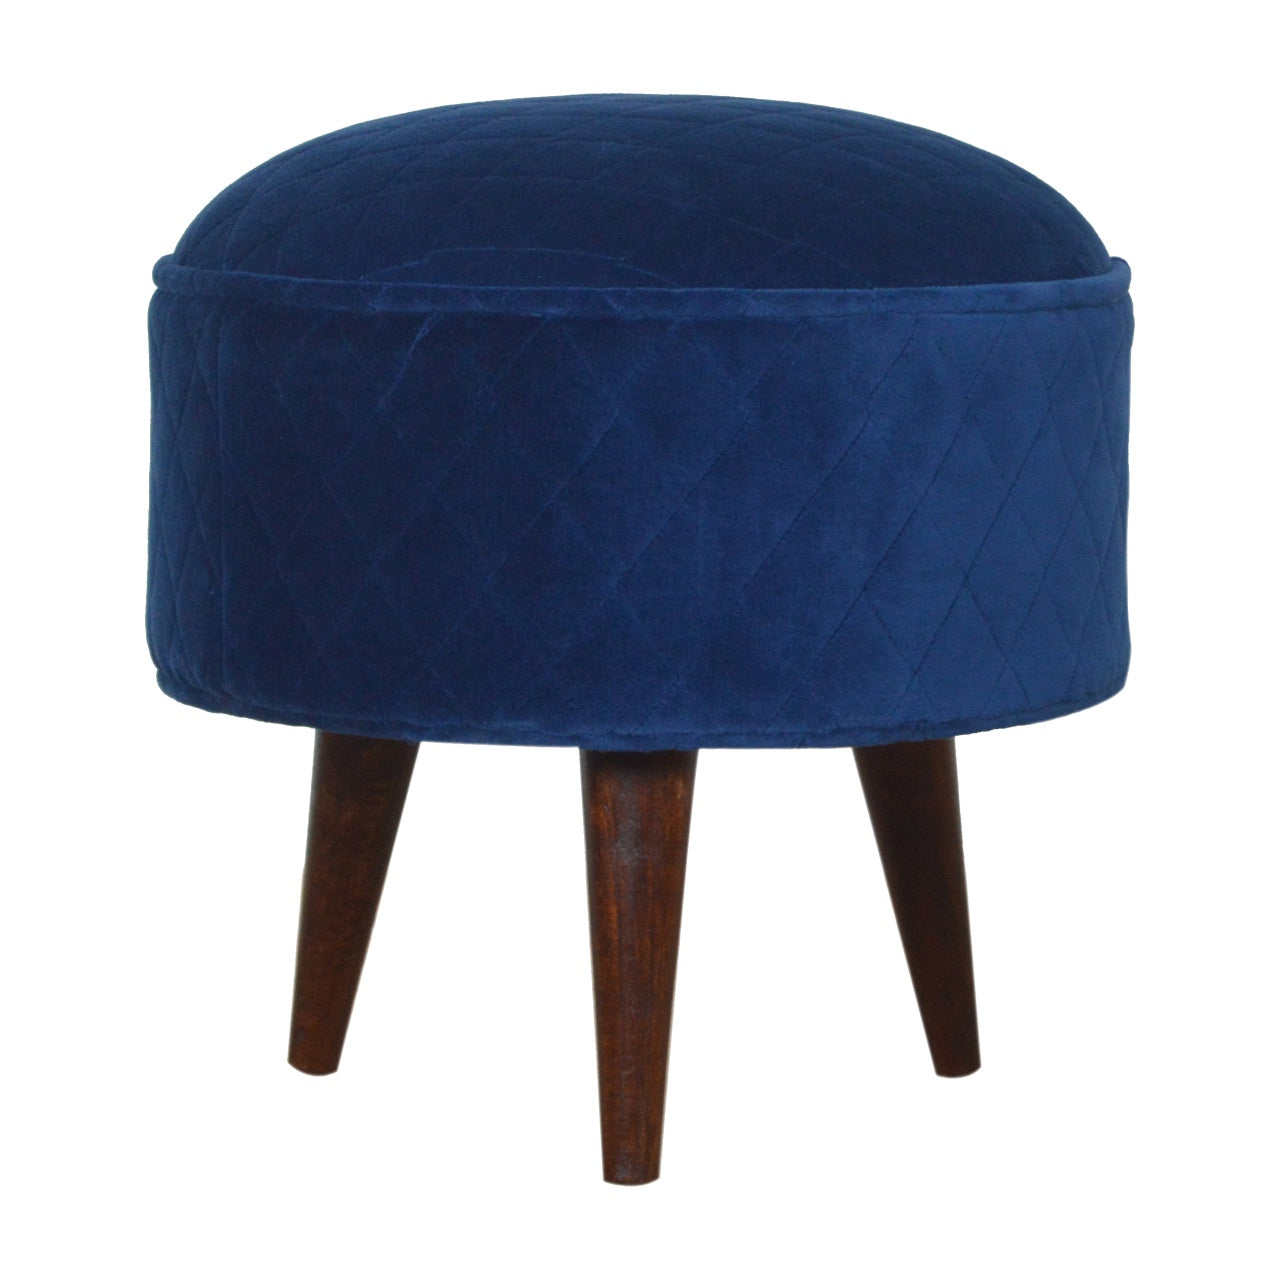 View Quilted Blue Velvet Footstool information